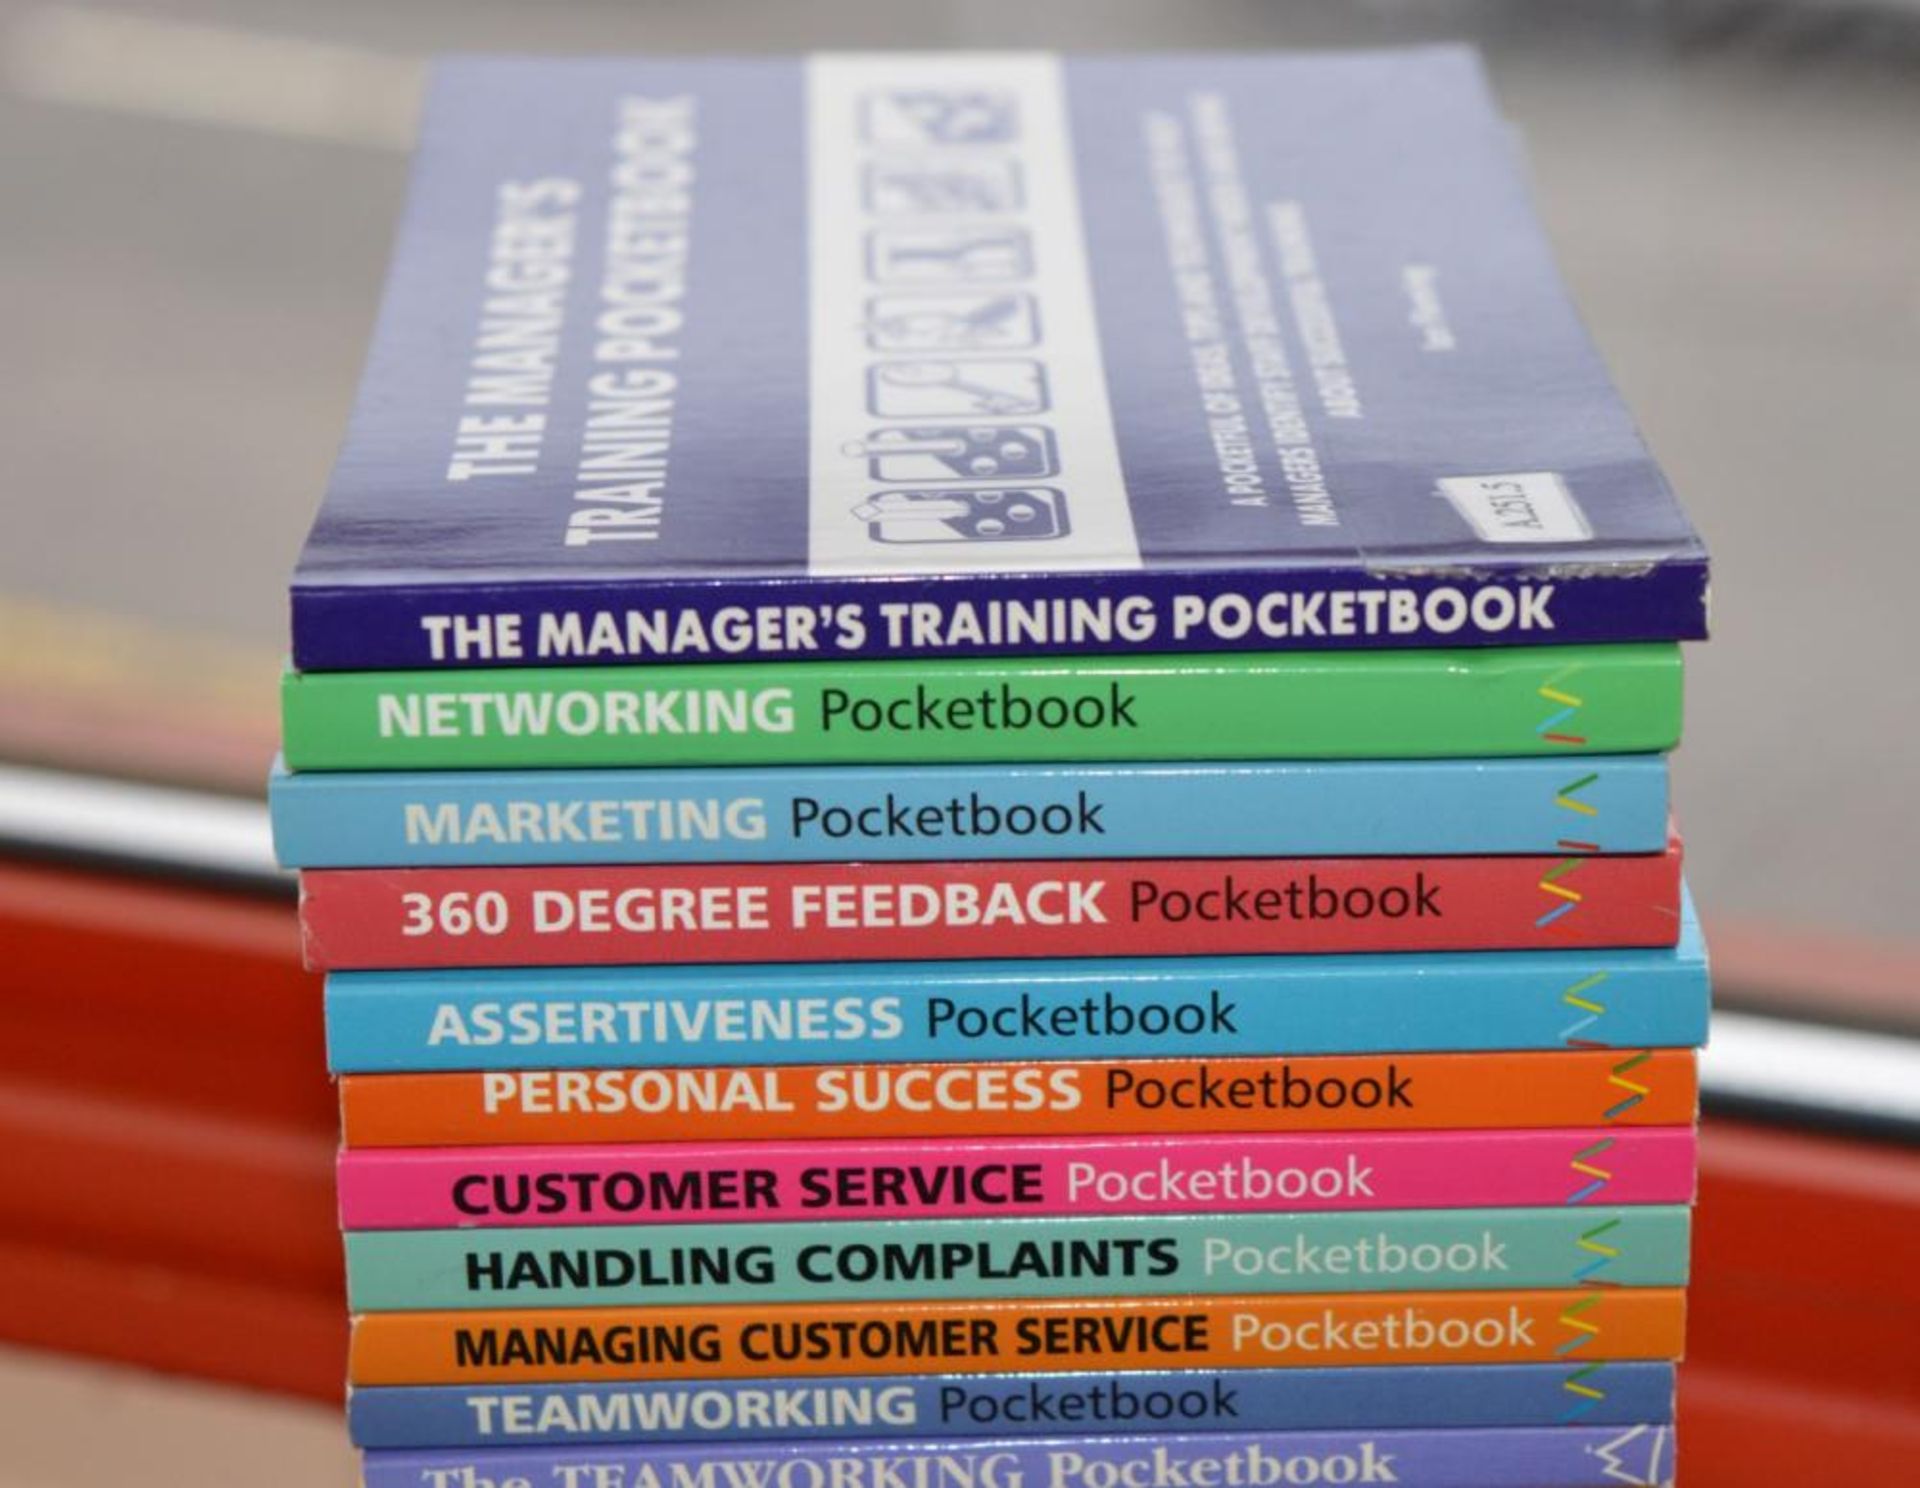 28 x Business Pocketbooks - Teamworking, Handling Complaints, Customer Service, IT Training and More - Image 8 of 8